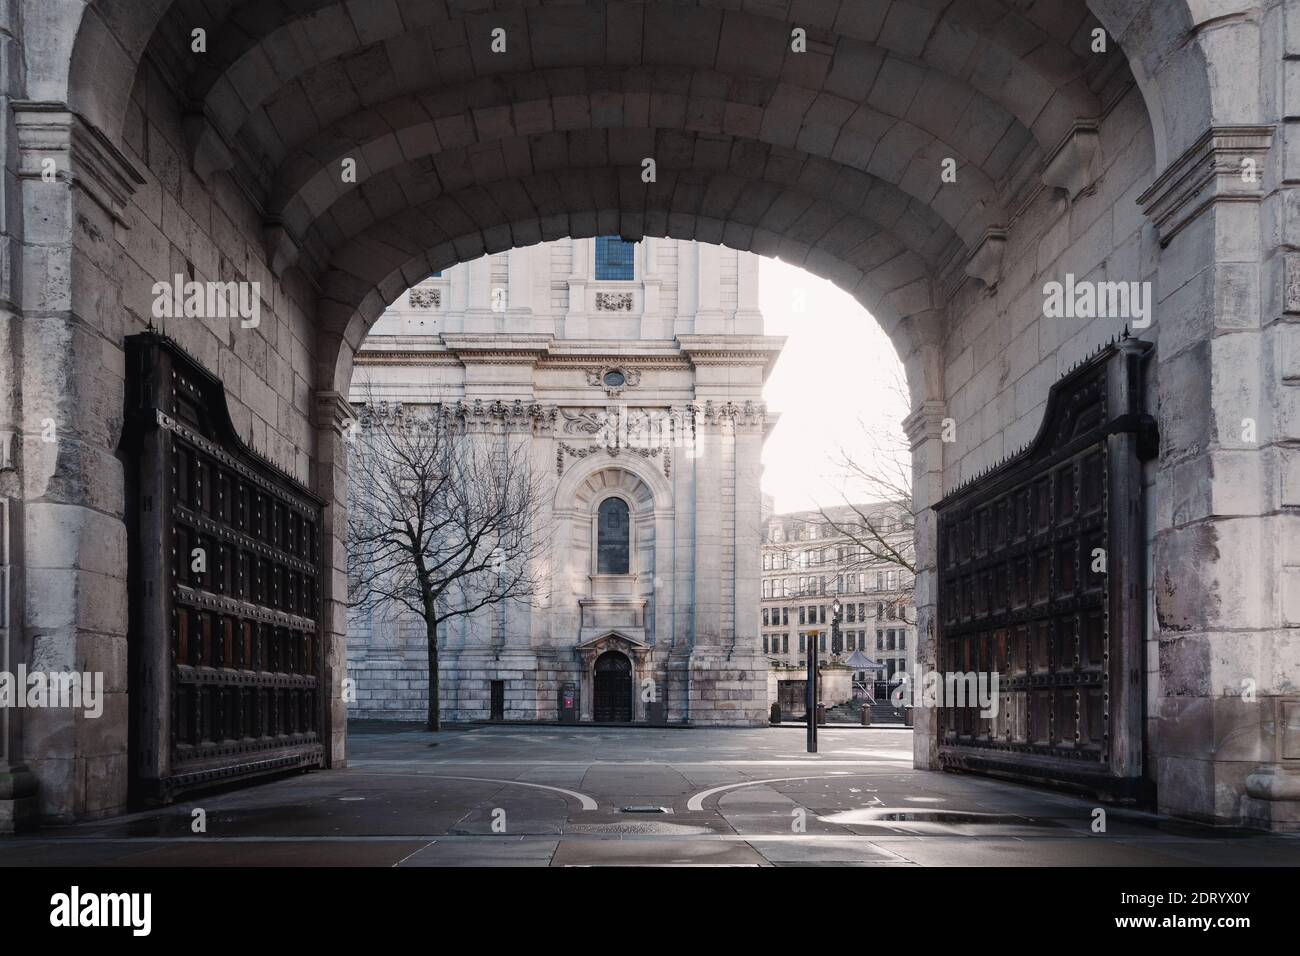 London, Uk- December 2020 : Temple Bar Gate by Sir Christopher Wren, Paternoster Square, near St Paul's Cathedral Stock Photo